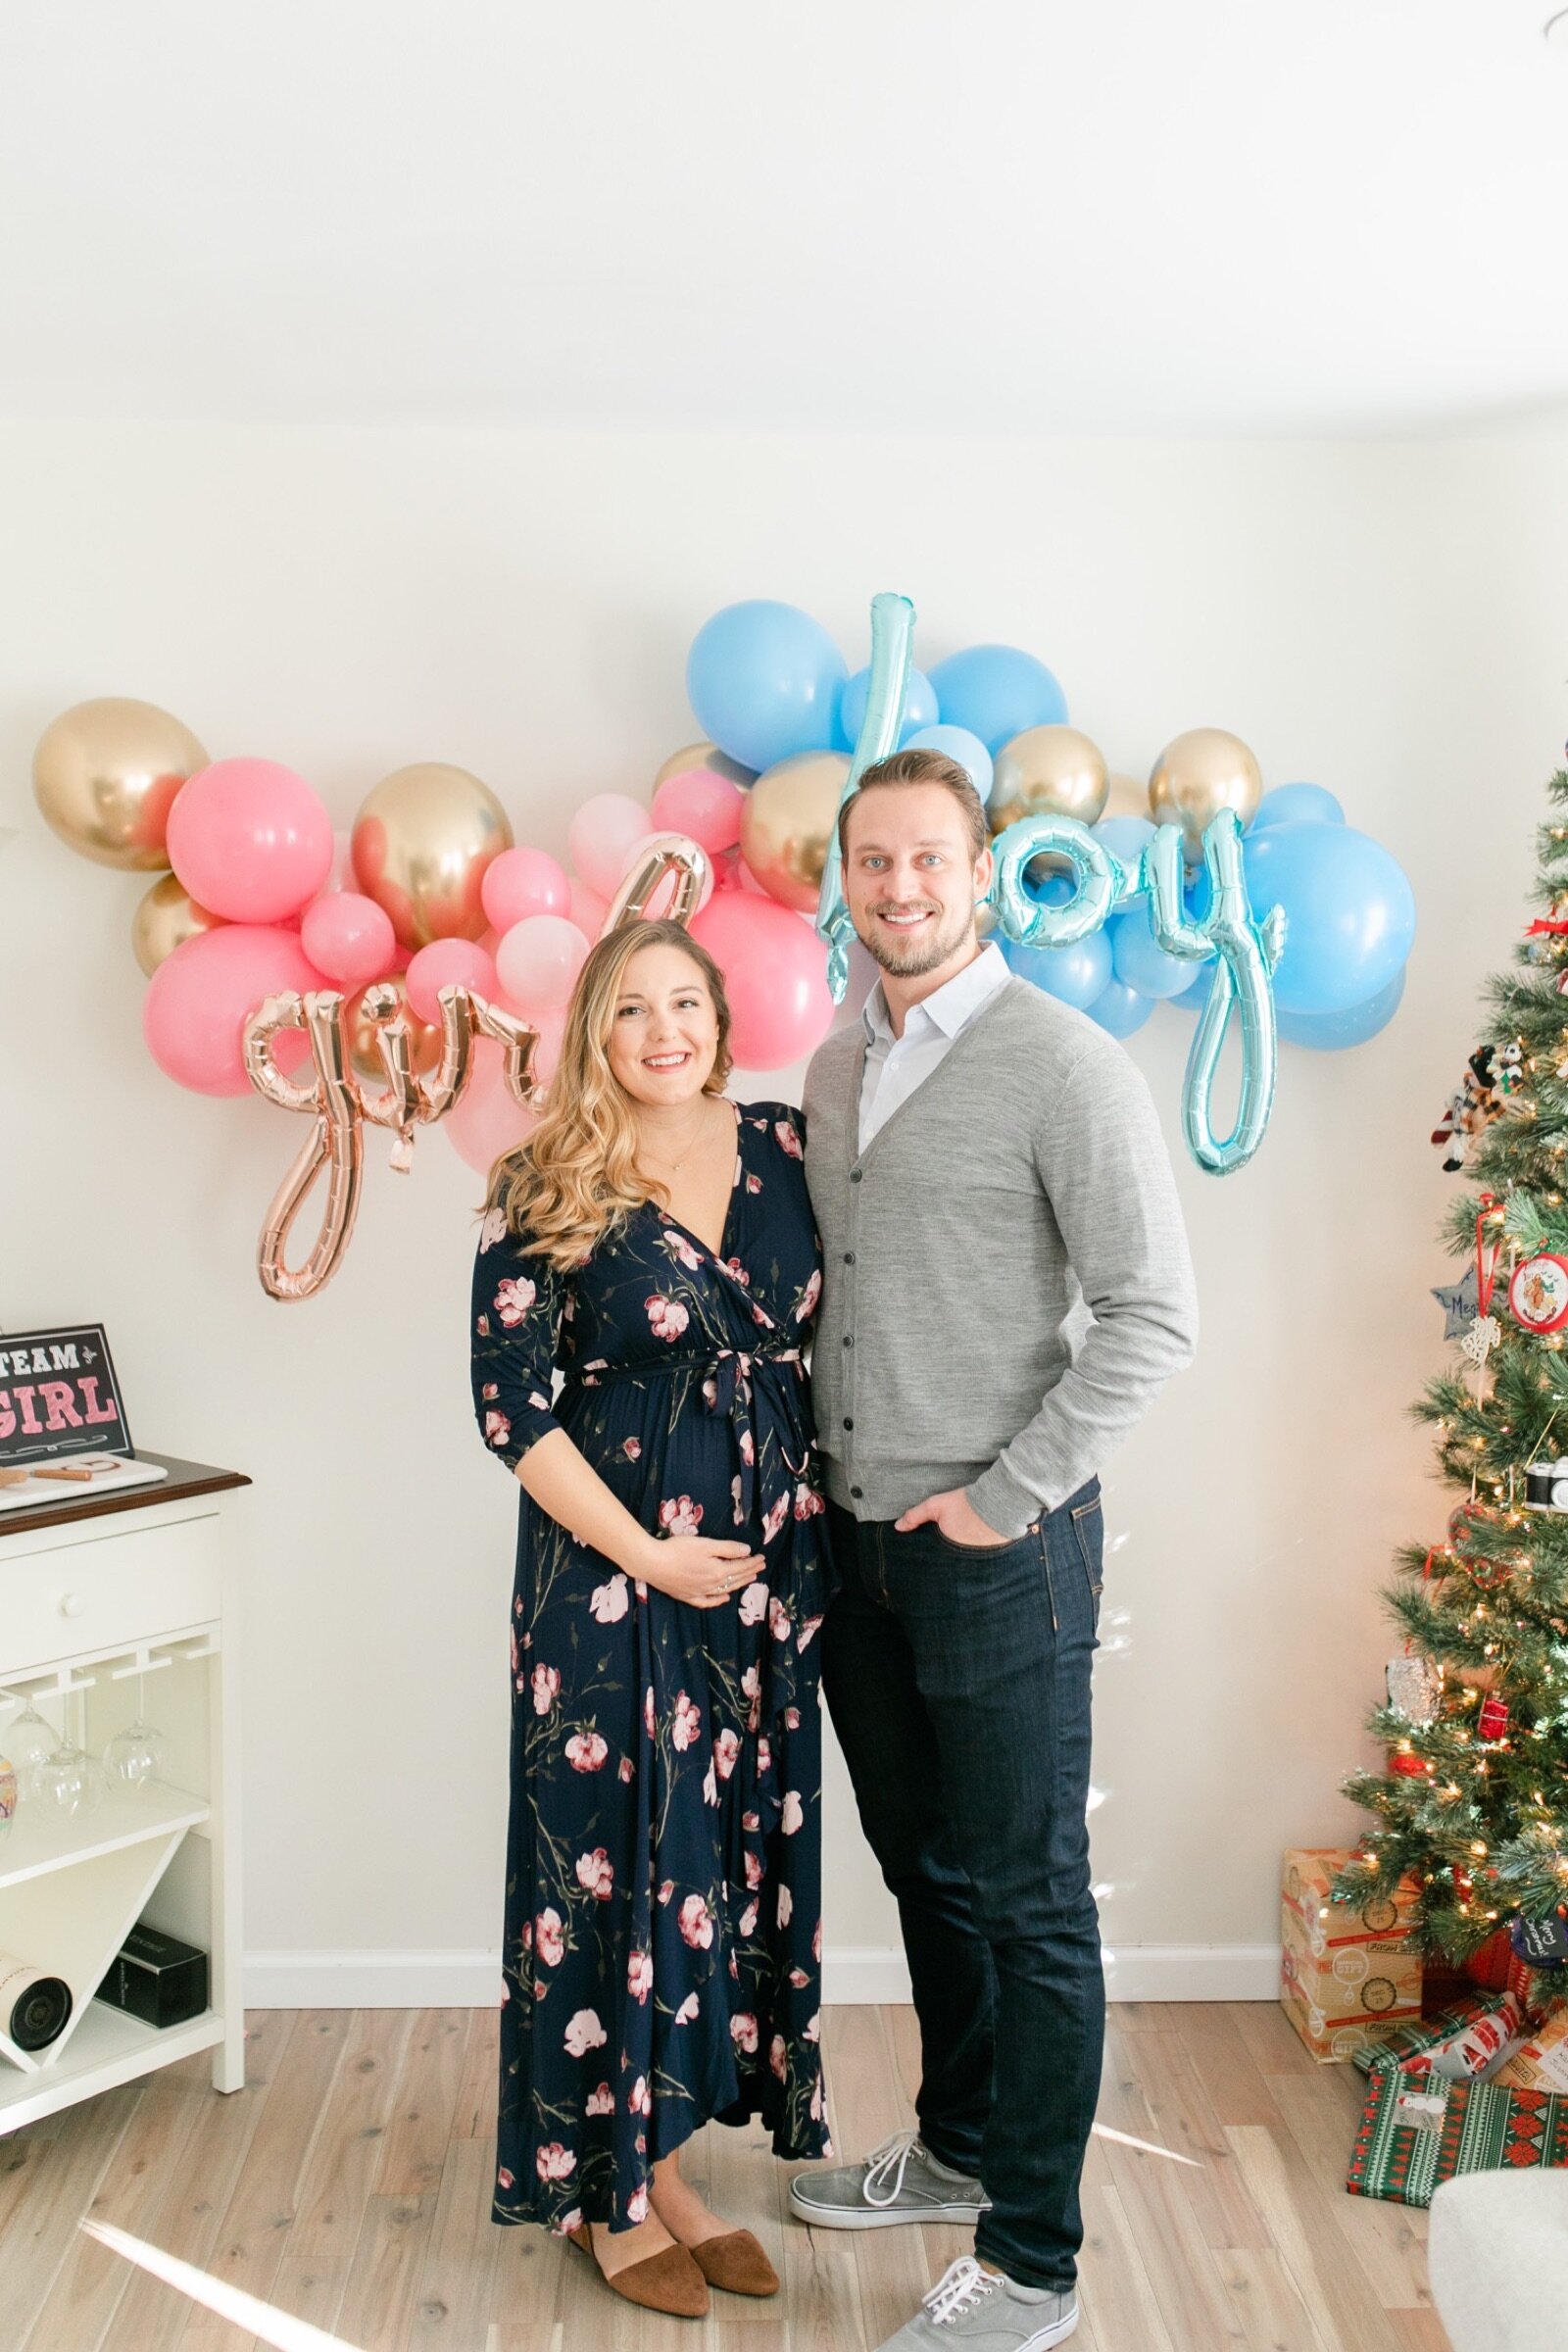 Our DIY Gender Reveal Party